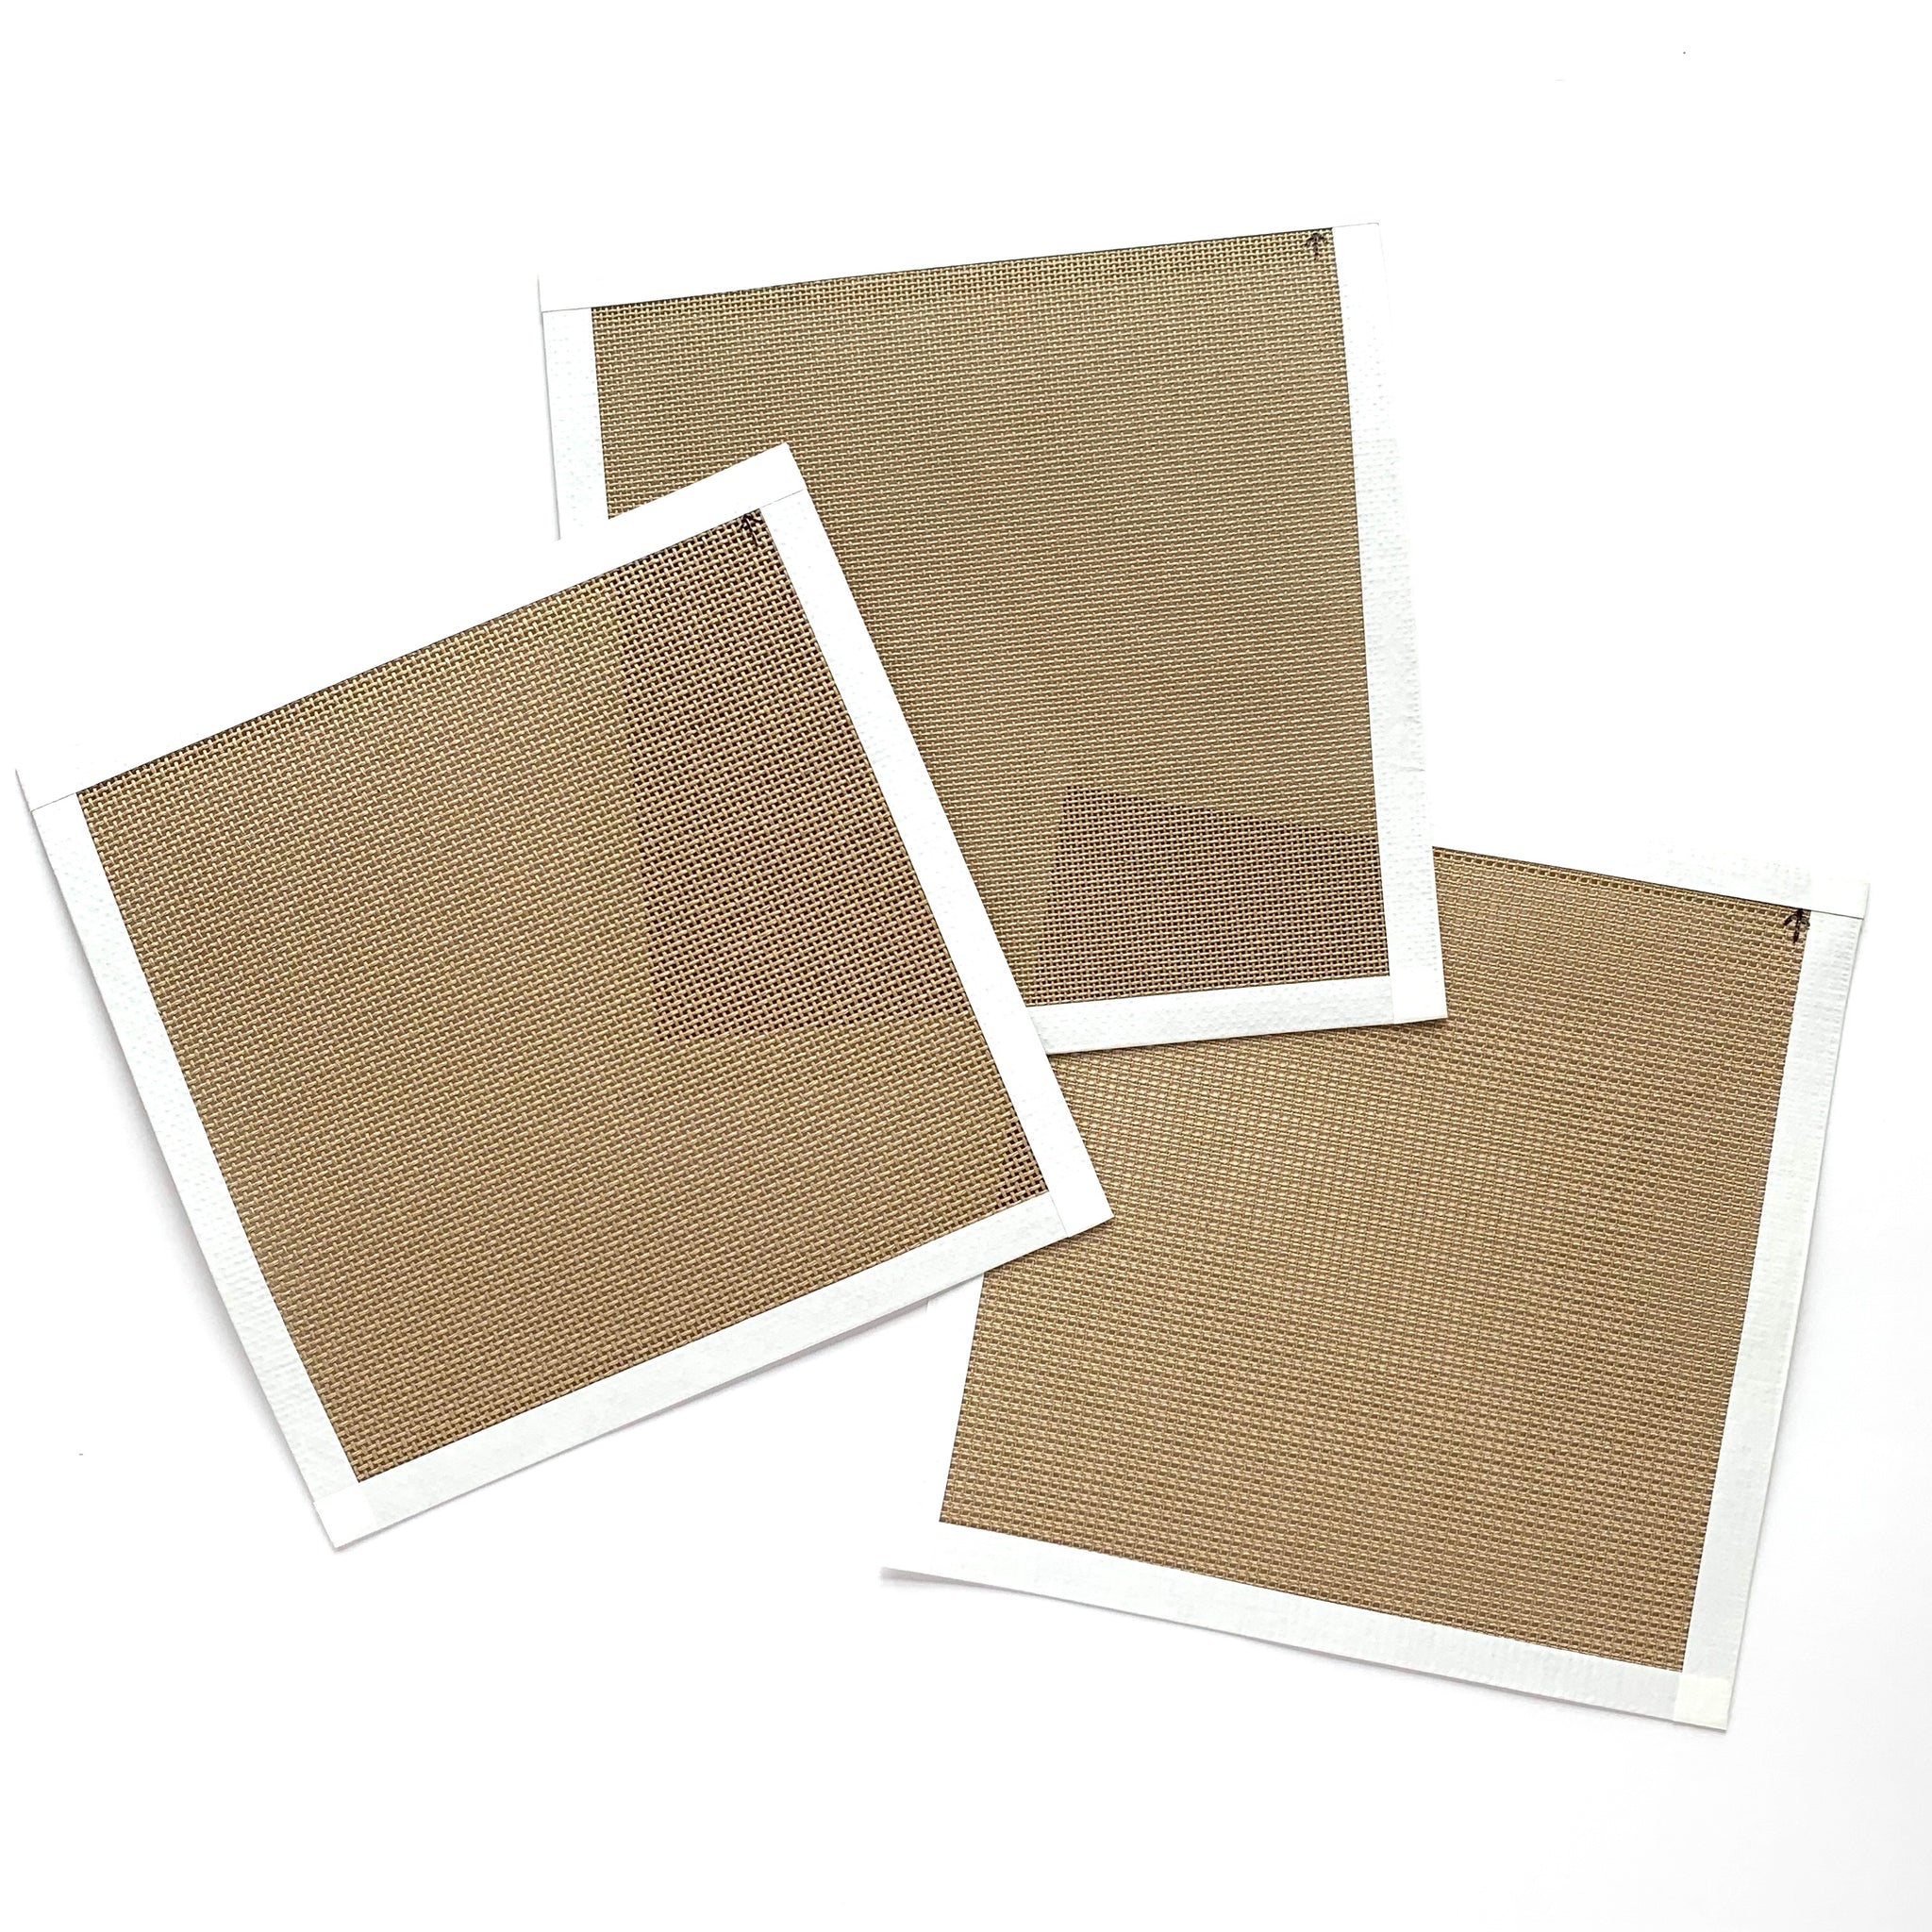 Blank Needlepoint Canvas - 8 Inch square of Zweigart Mono Deluxe (13 or 18) or Penelope in Brown